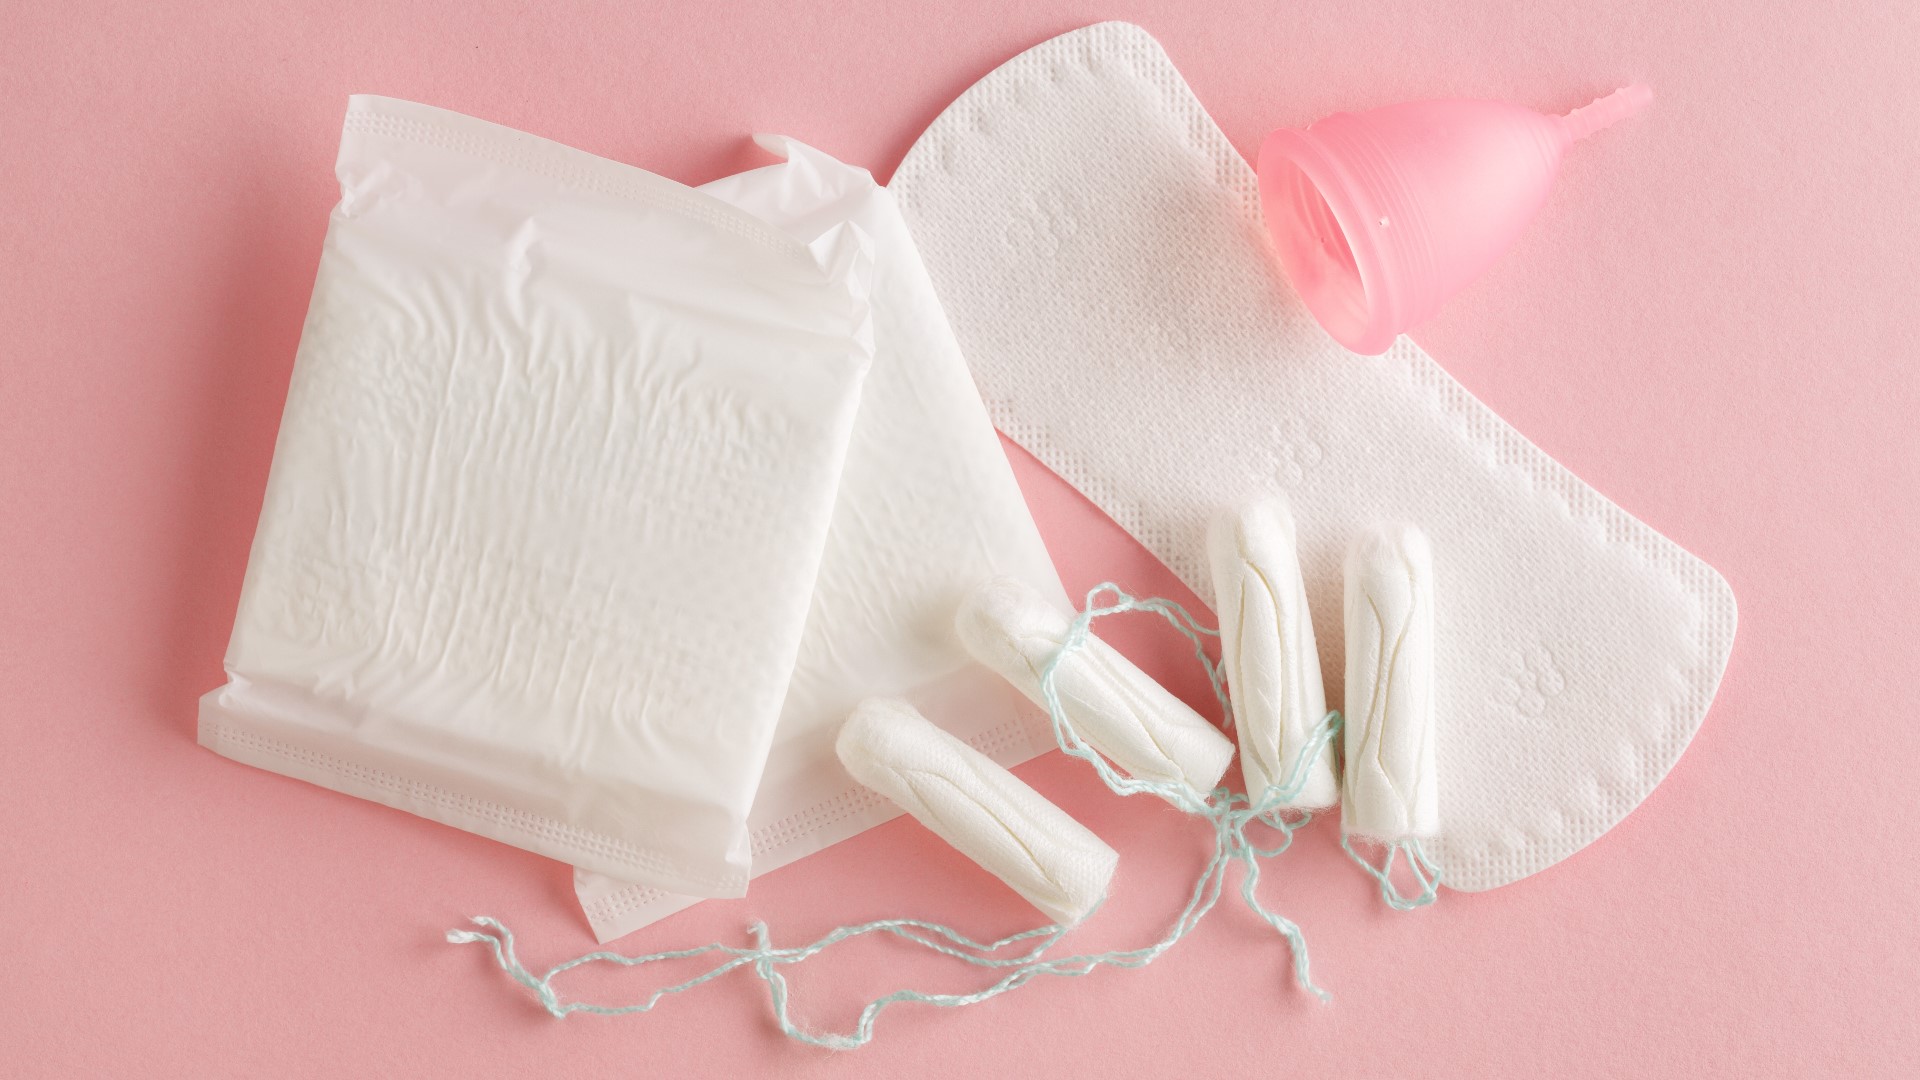 Under HB 142, the six percent sales-tax would be removed from tampons, sanitary napkins, panty liners, menstrual cups and any similar products.